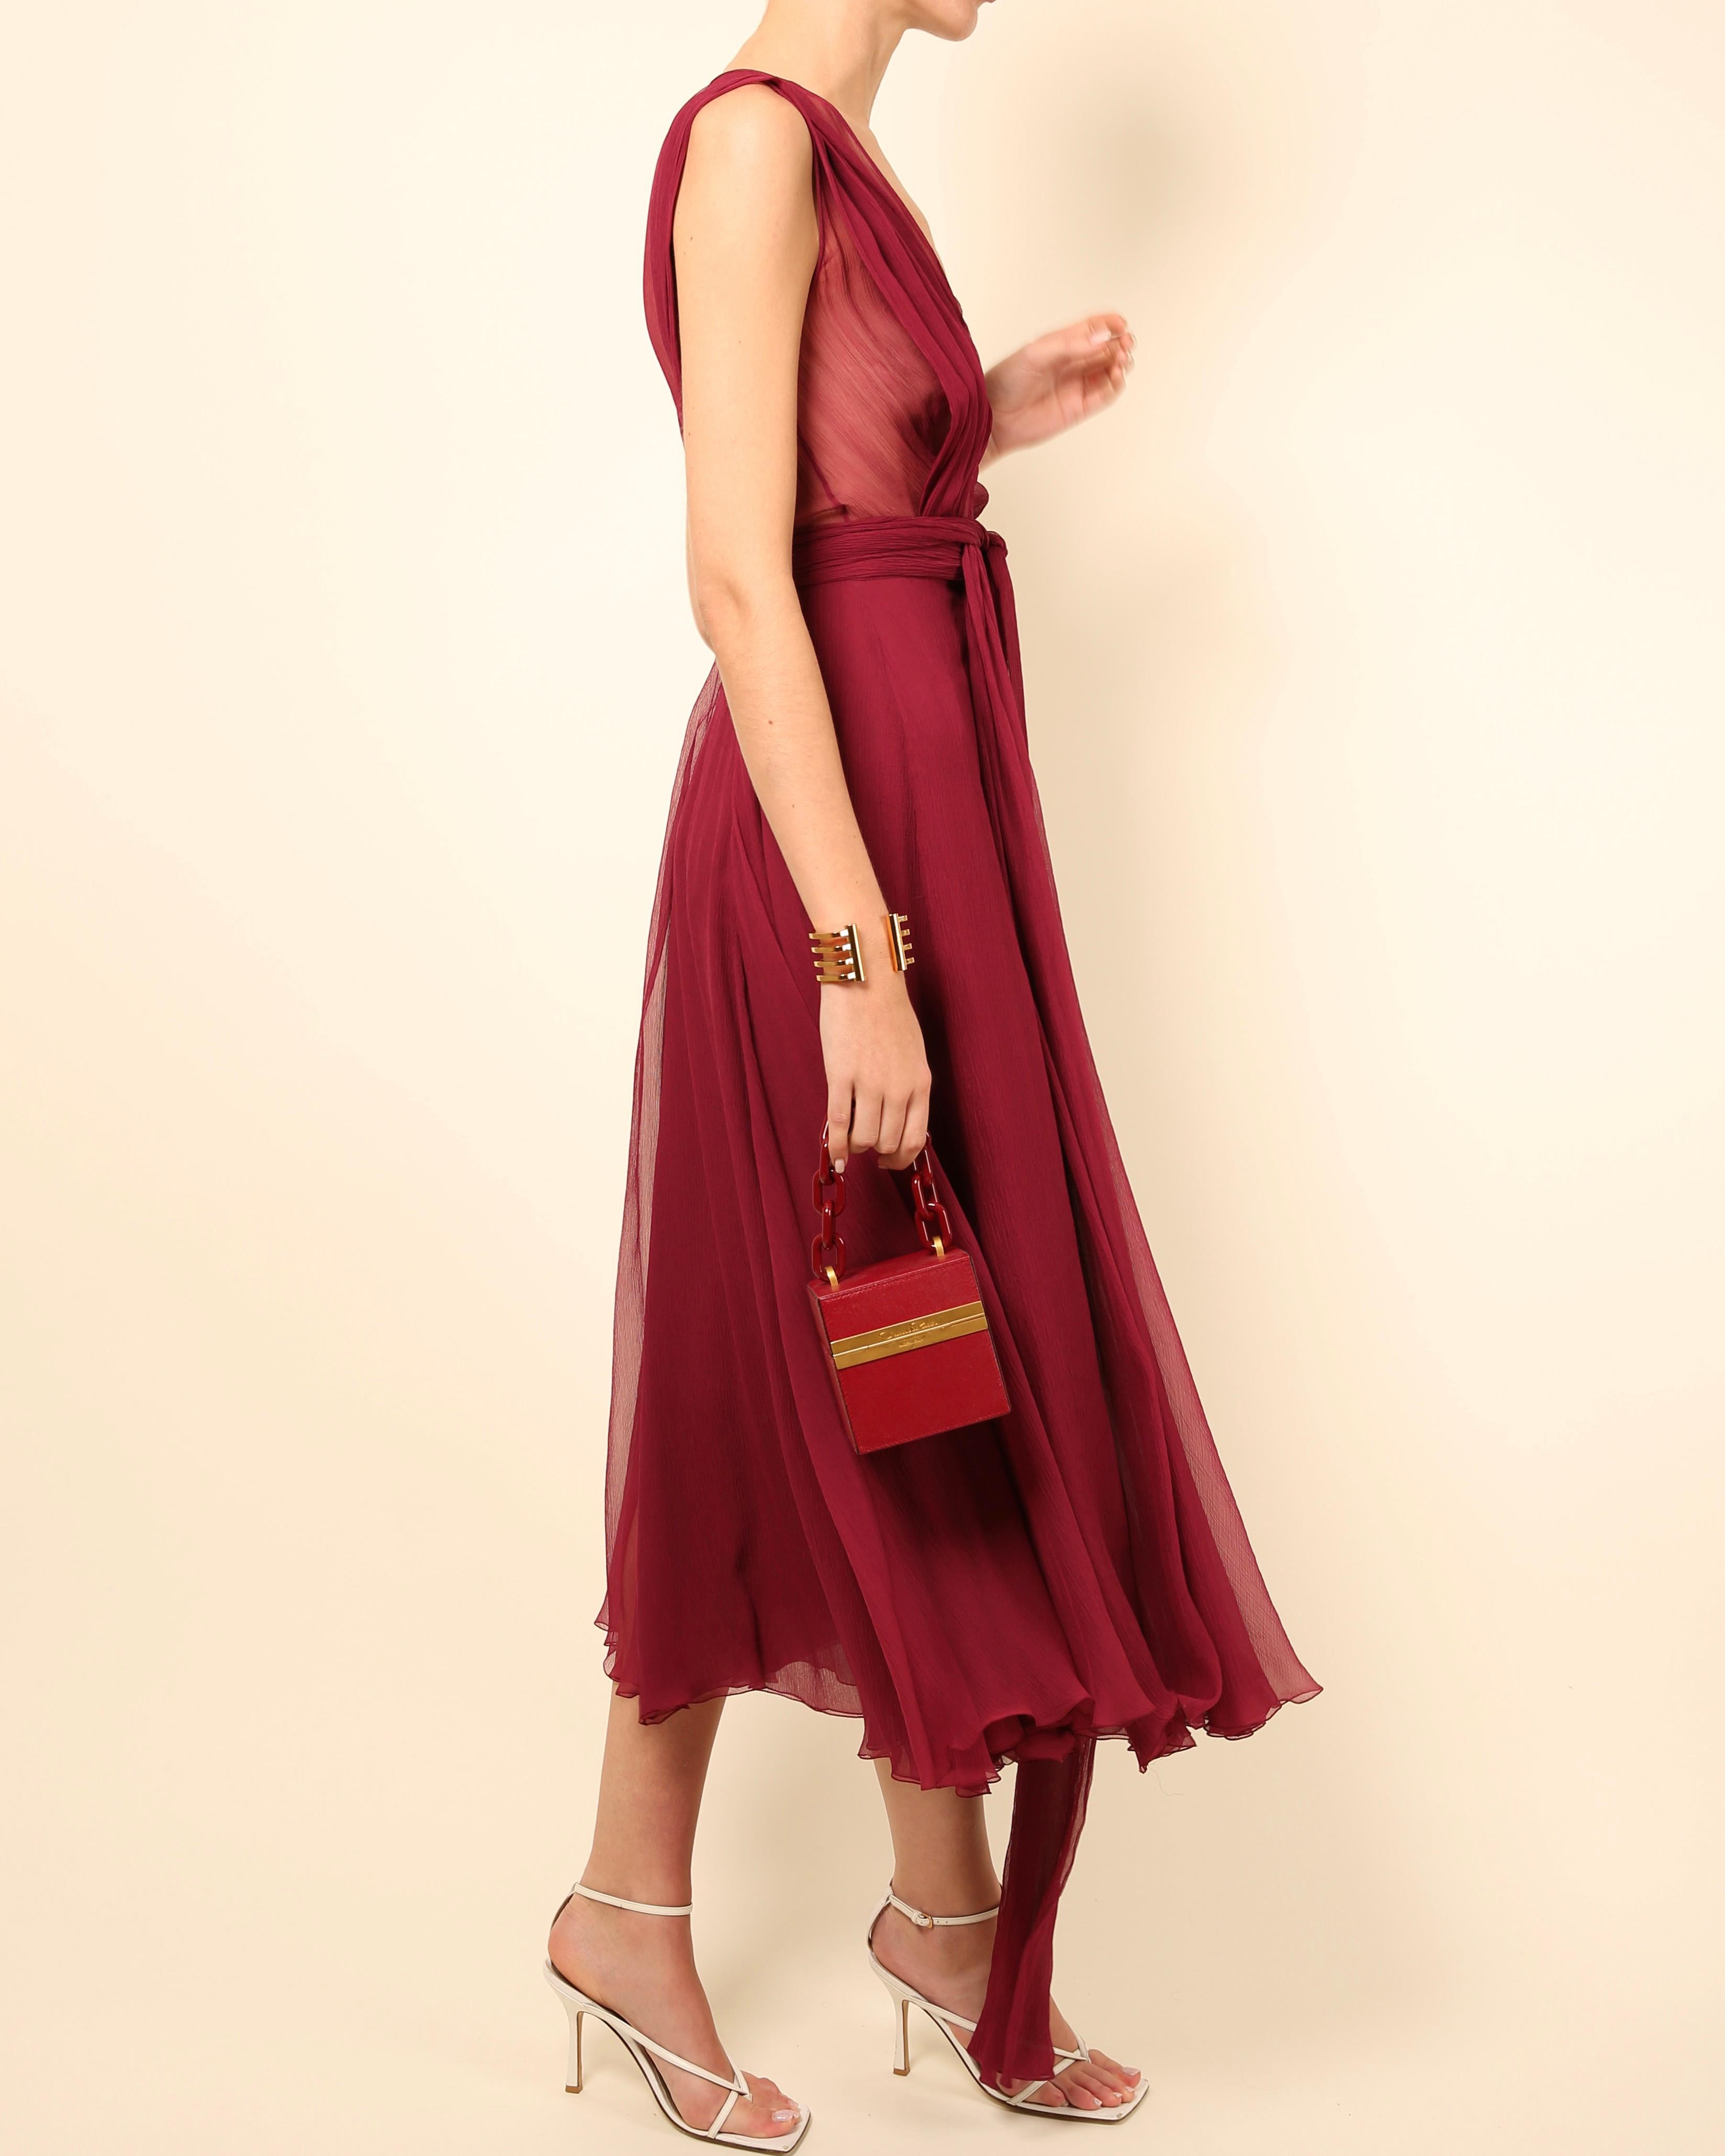 Gucci Fall 2011 burgundy chiffon silk plunging neckline sheer cut out gown dress For Sale 6